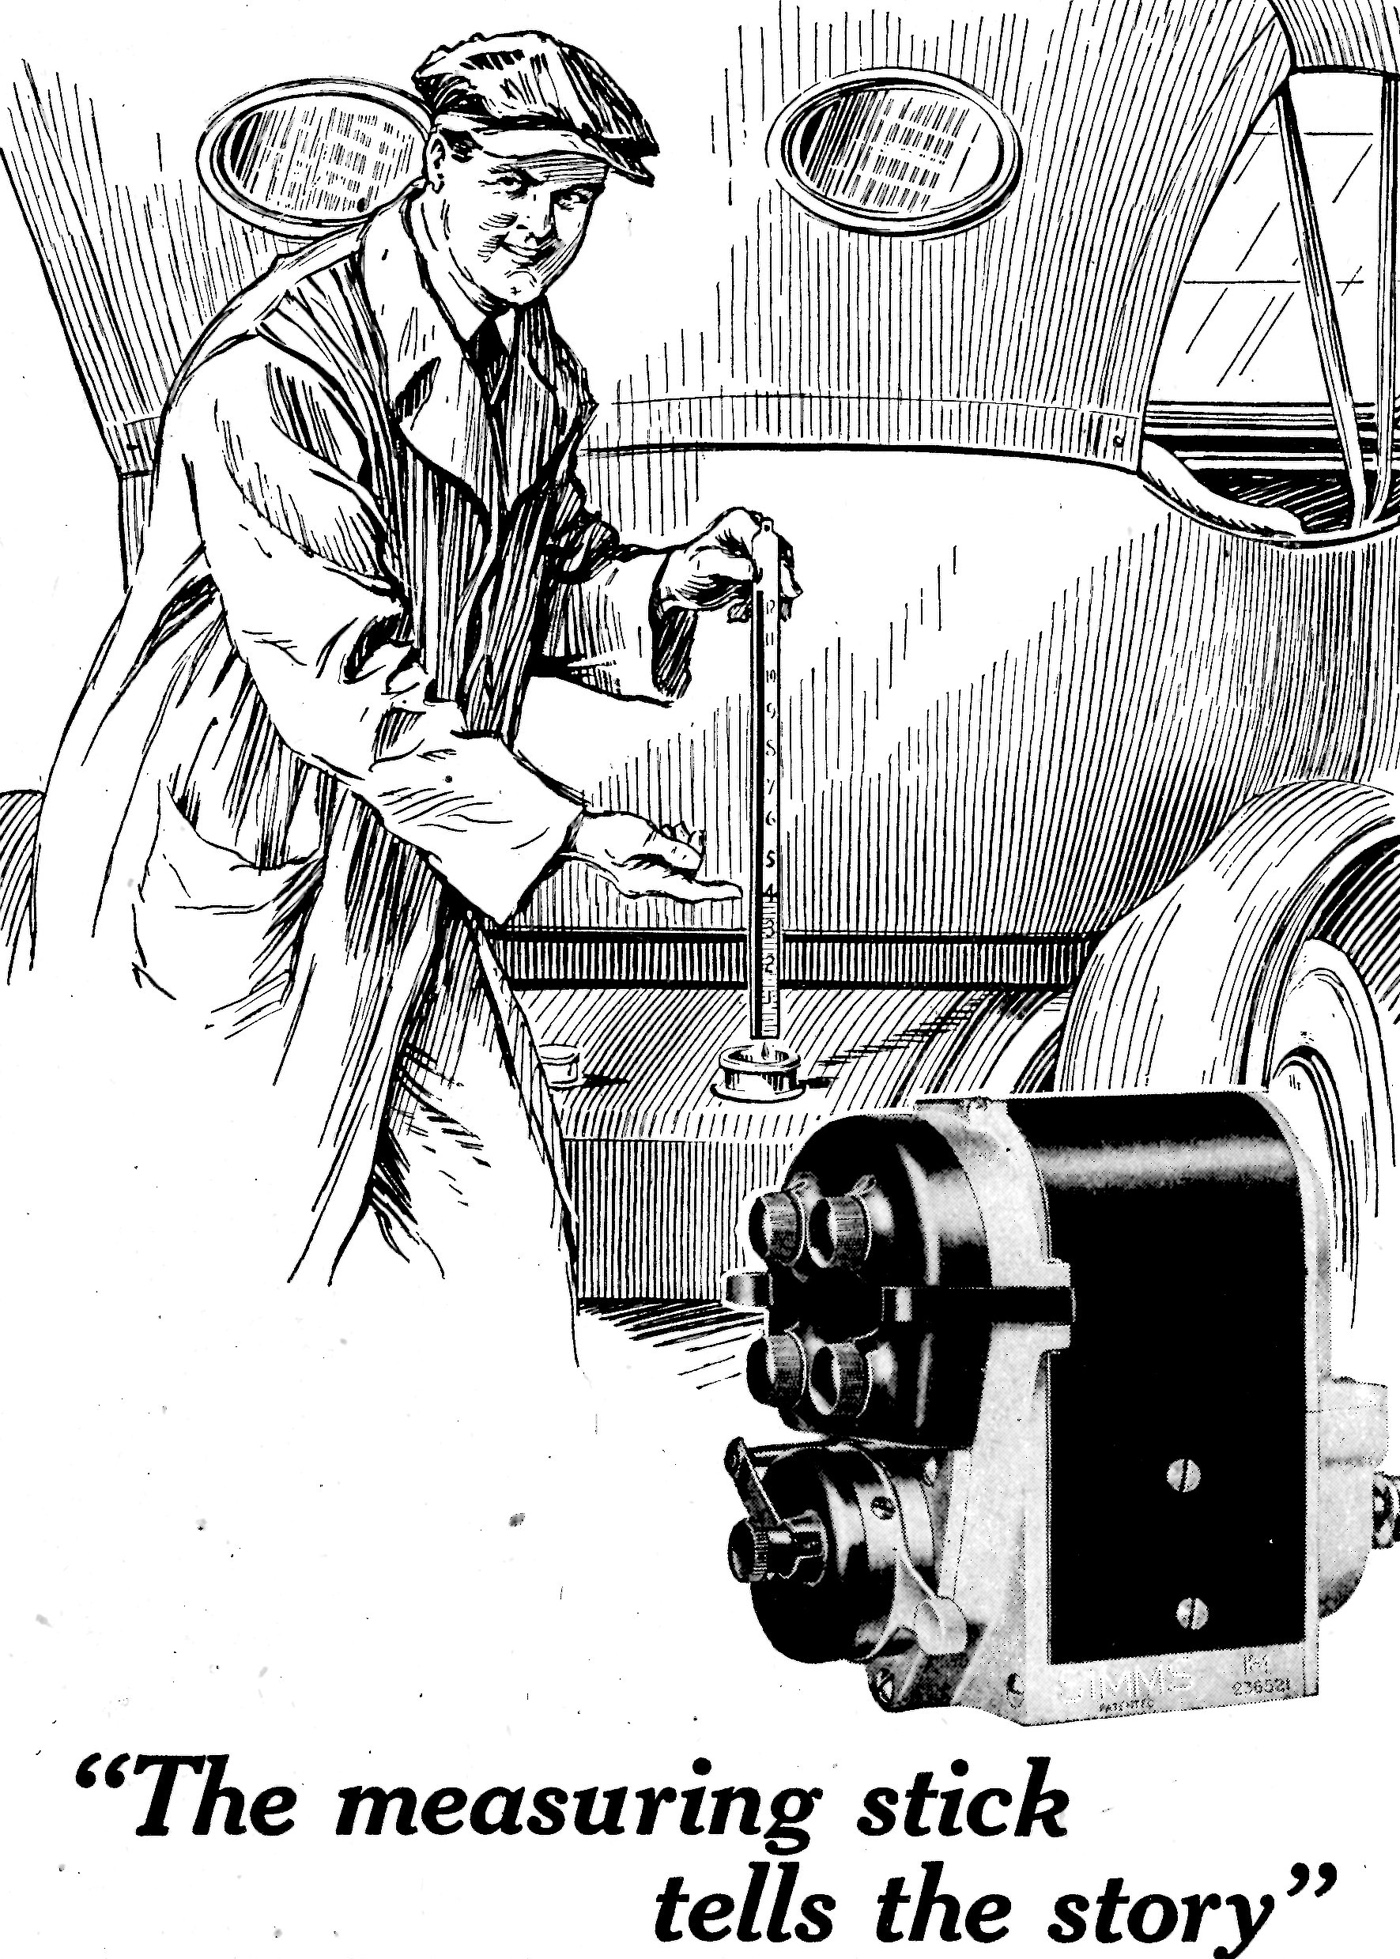 an advertit featuring a woman working in a machine and a man fixing it